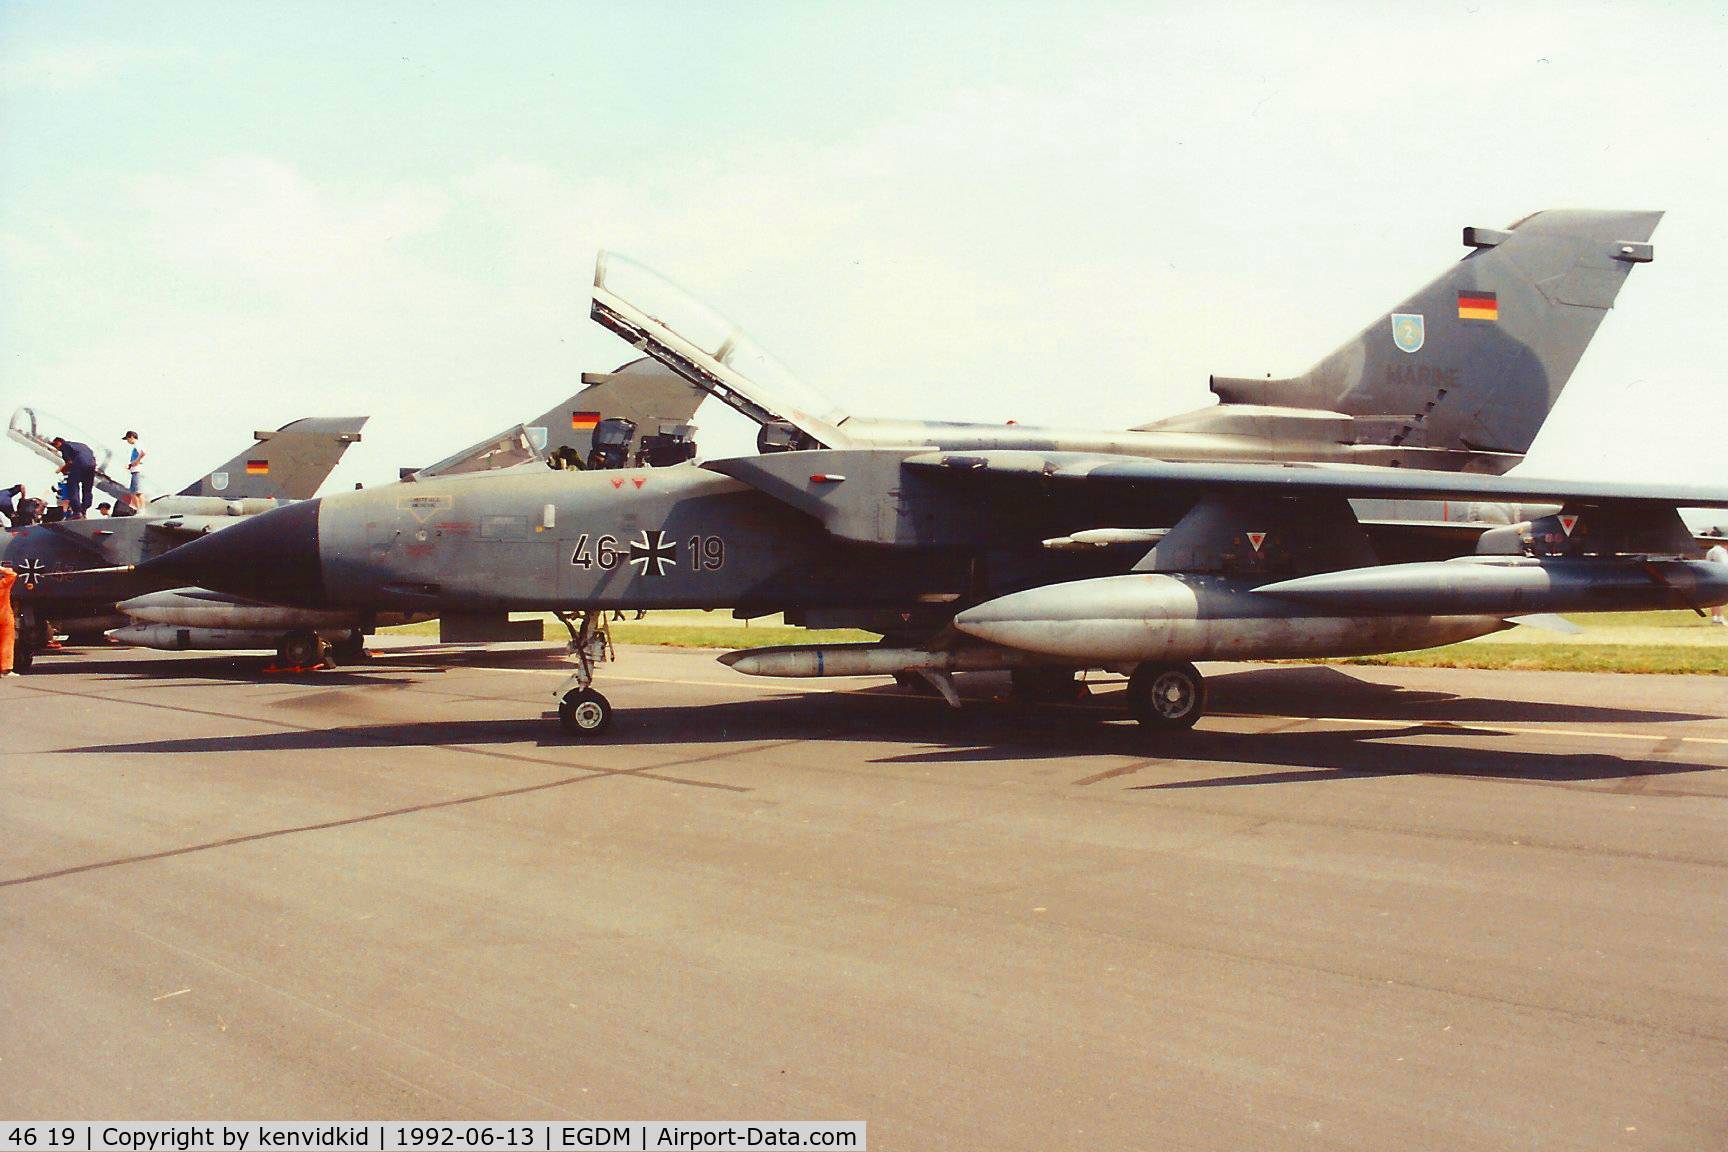 46 19, Panavia Tornado IDS C/N 792/GS252/4319, At Boscombe Down, scanned from print.